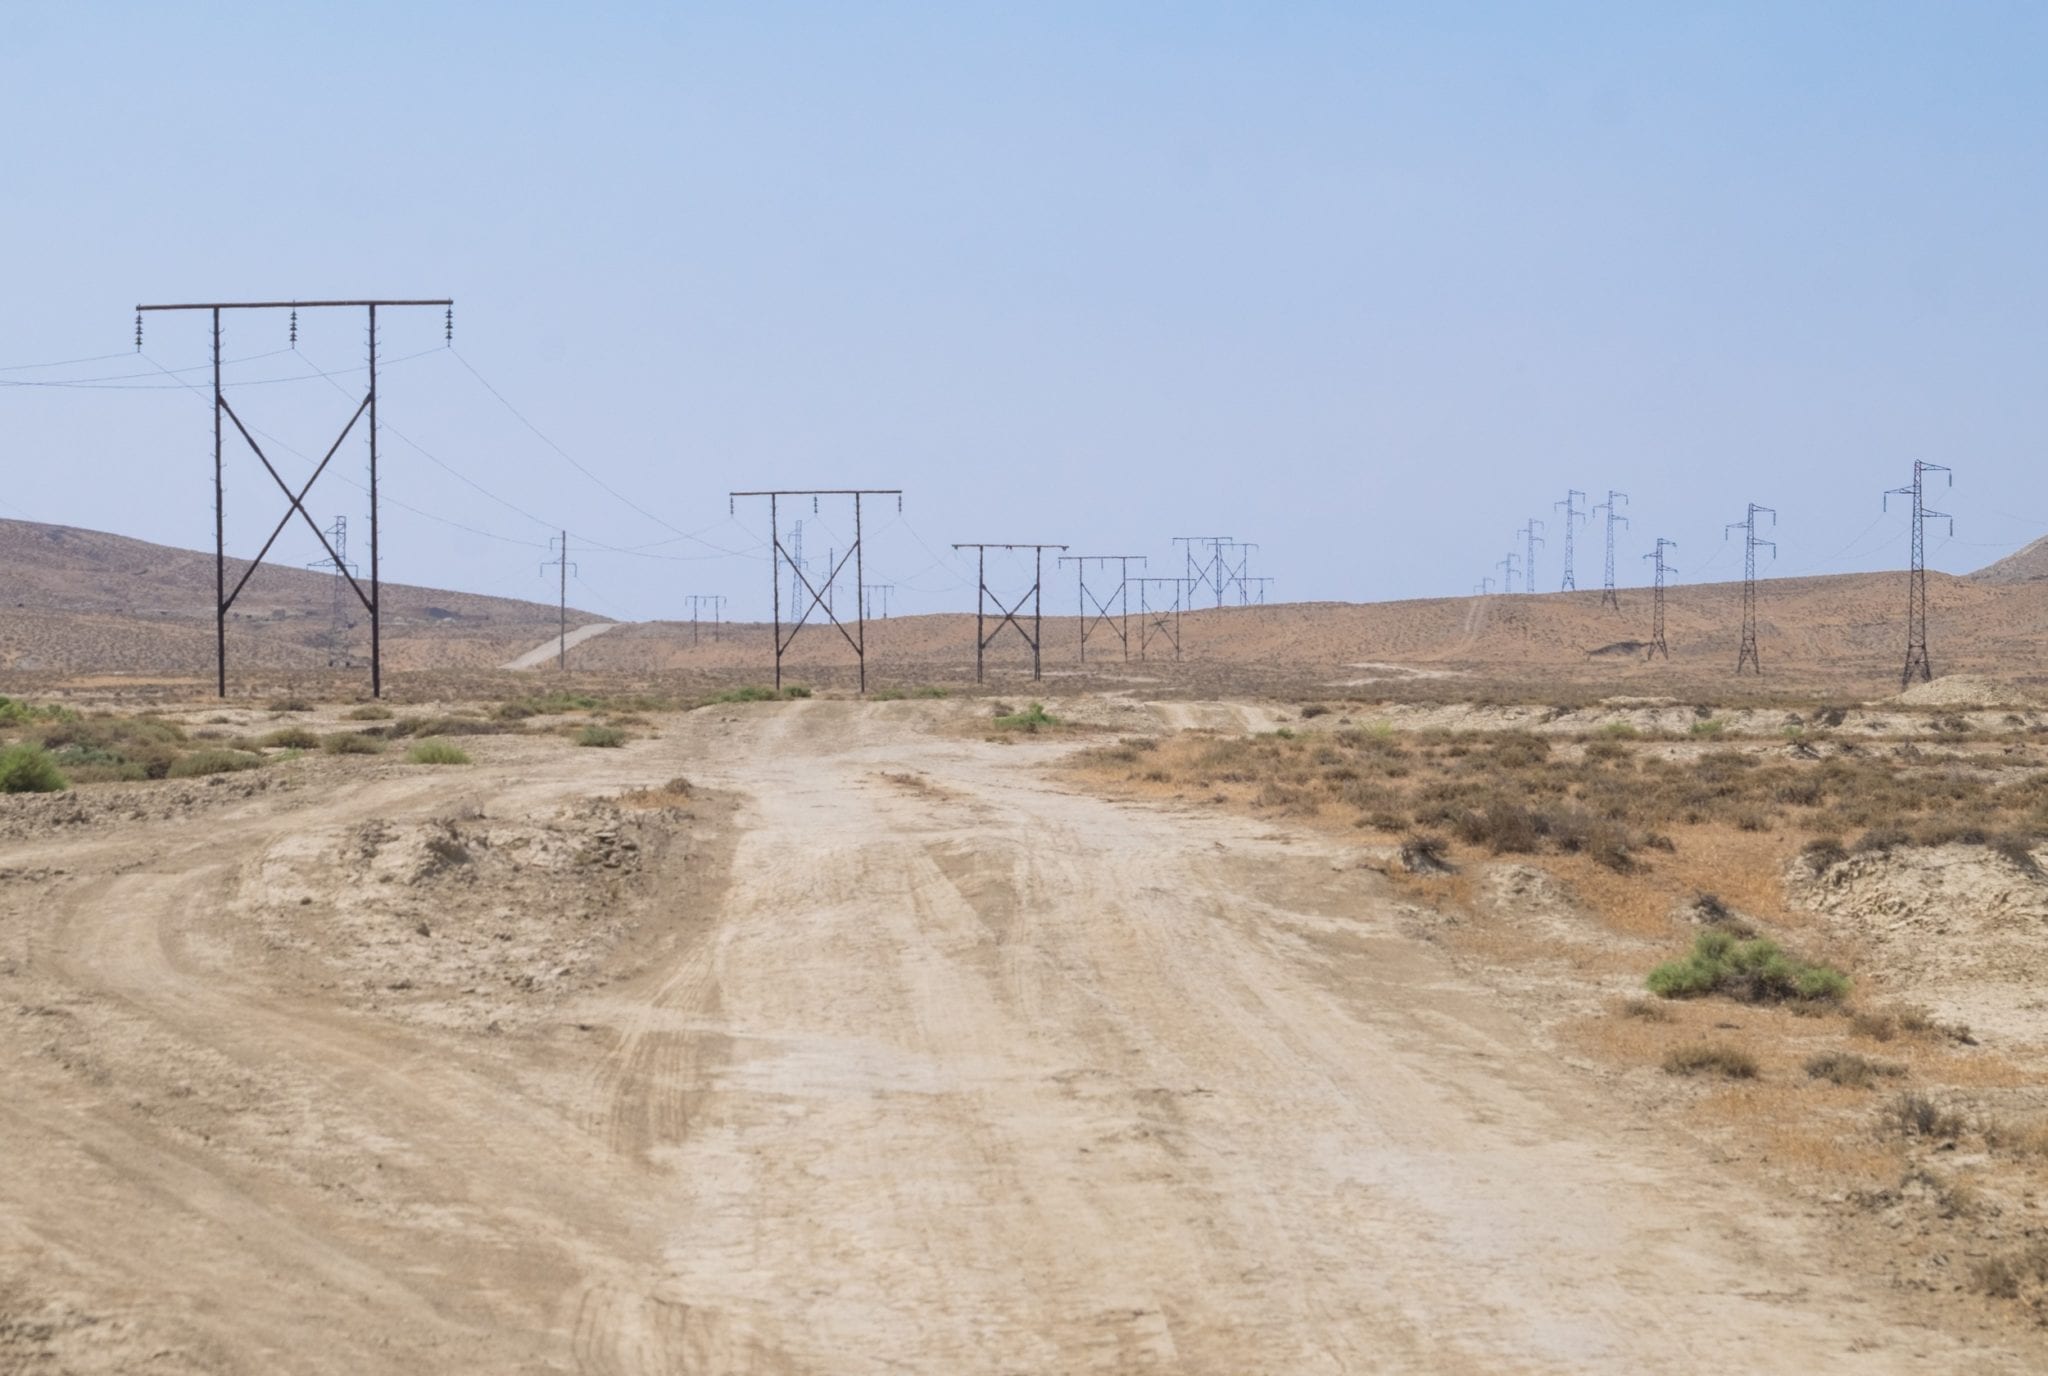 A rough desert landscape with telephone poles running across the sand.